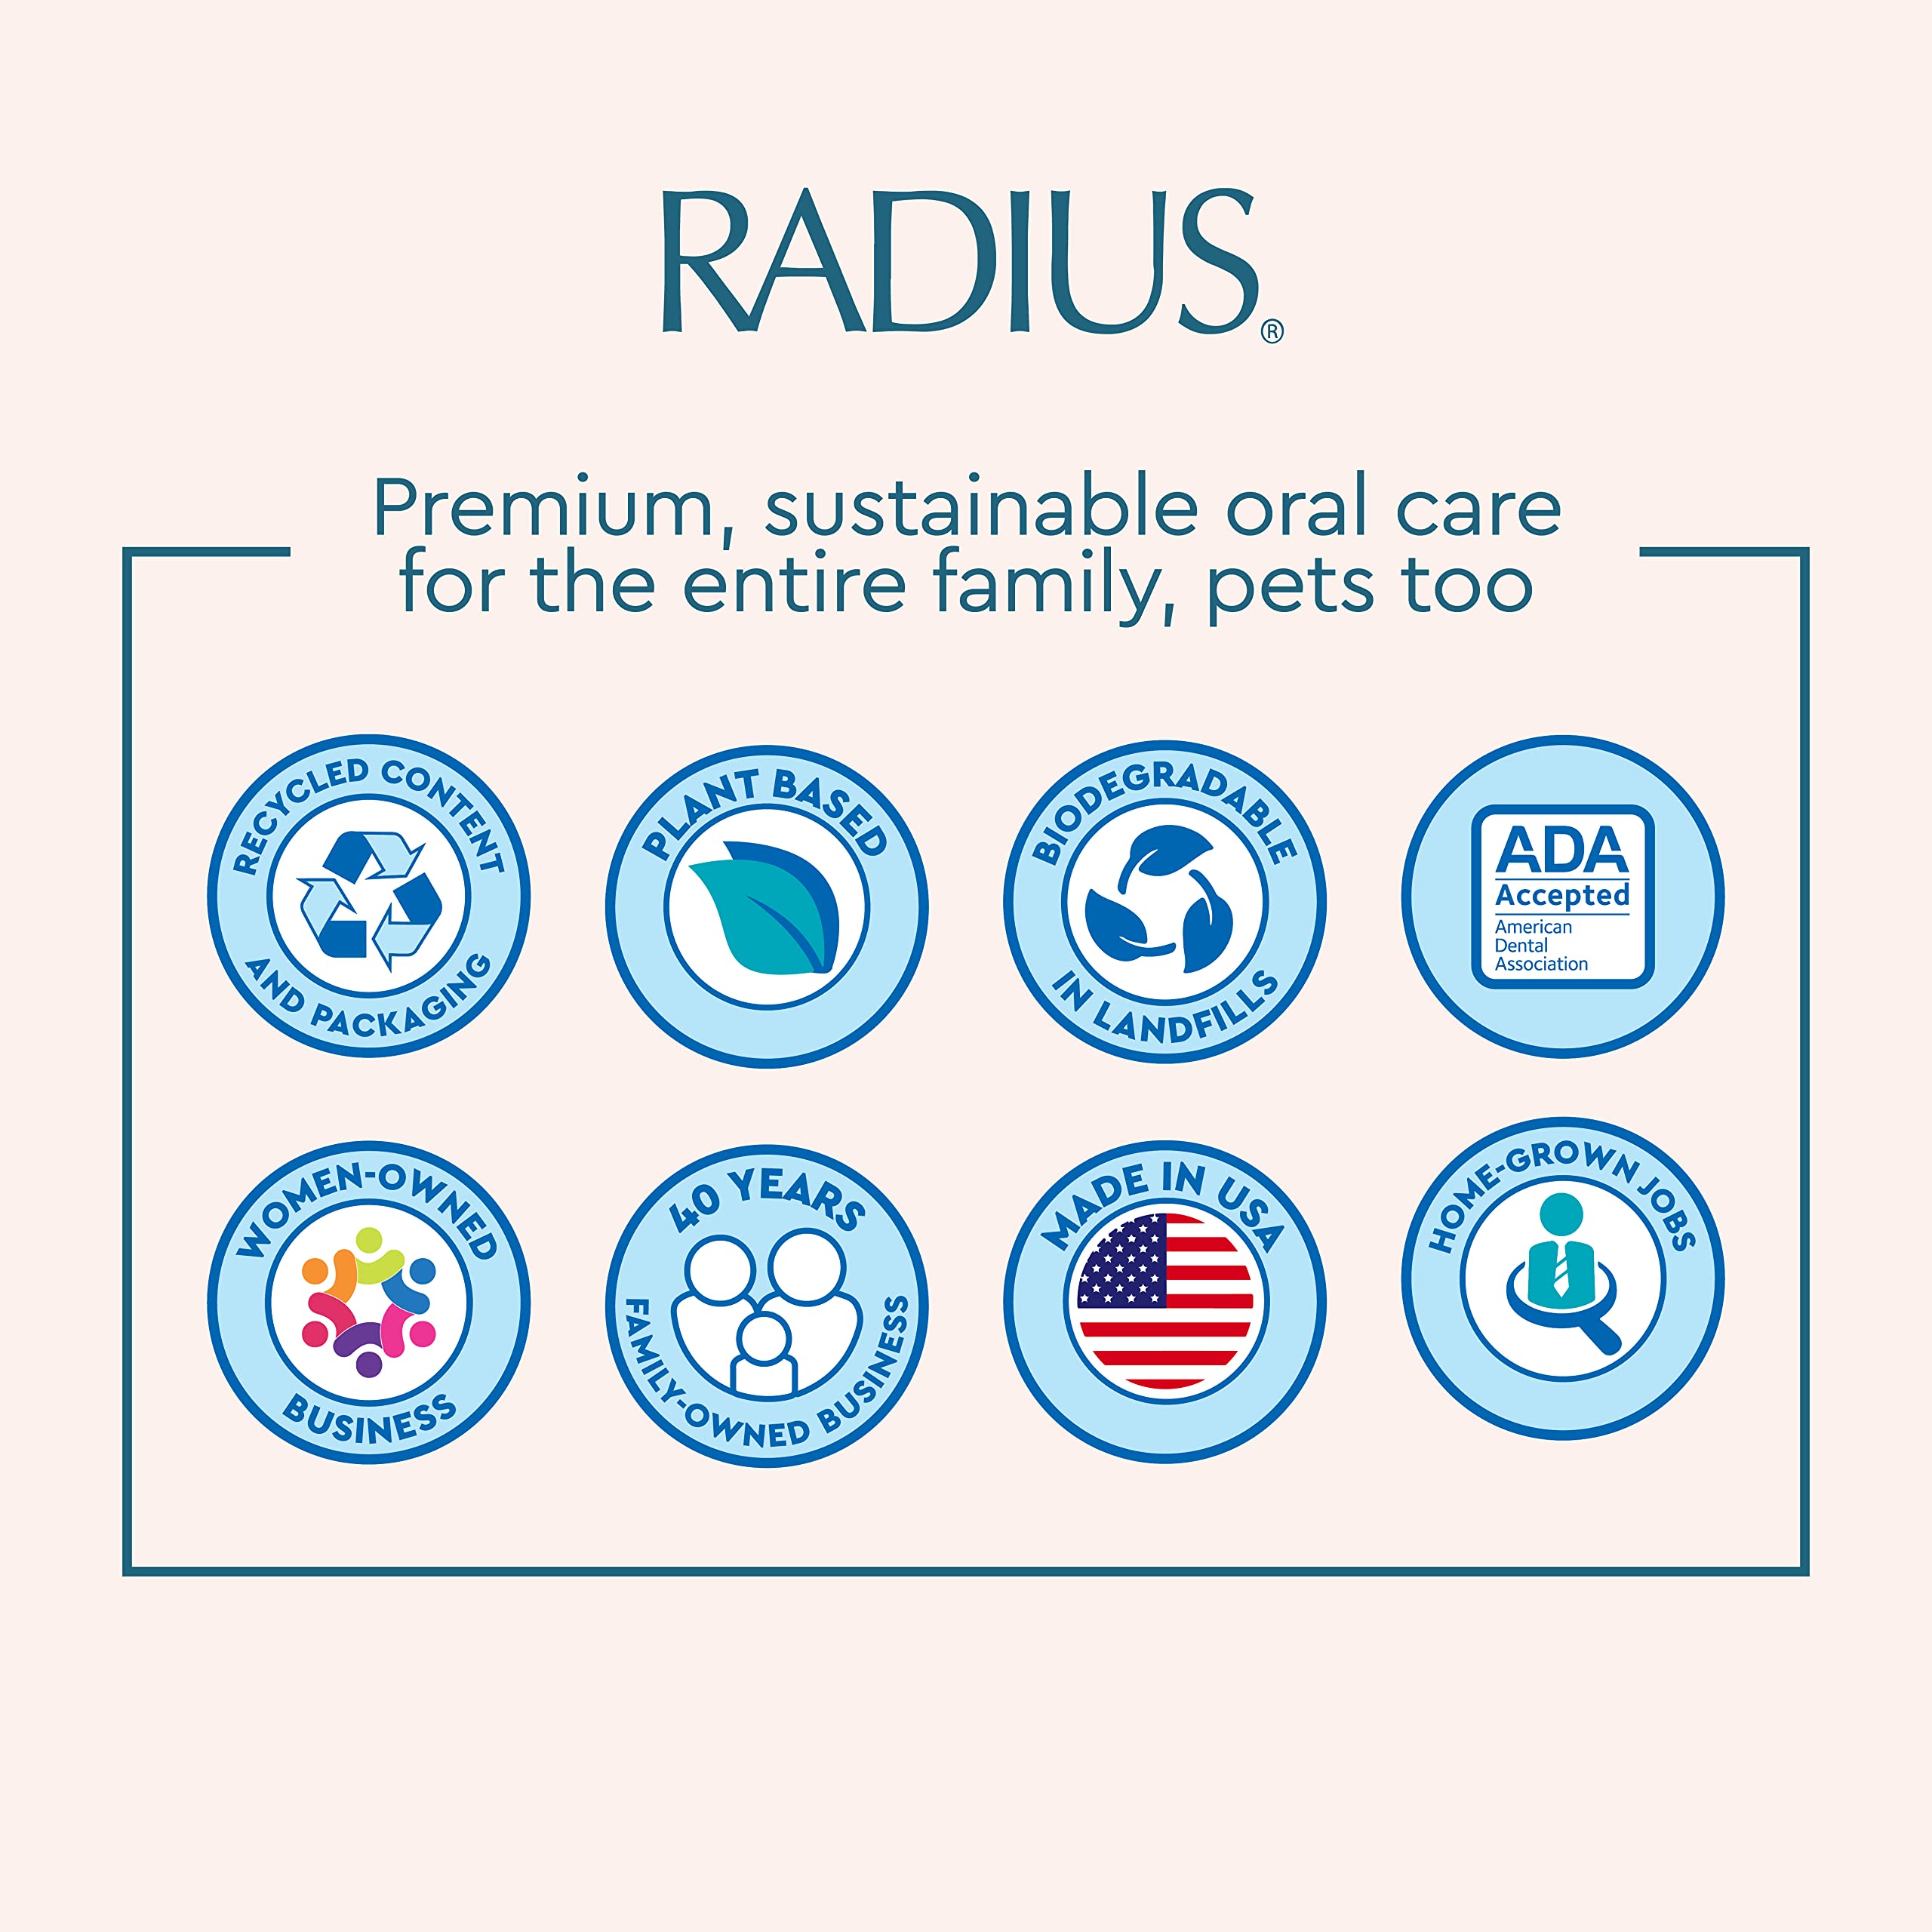 Radius Peppermint Dental Floss 55 Yards Vegan & Non-Toxic Oral Care Boost & Designed to Help Fight Plaque Clear - Pack of 4